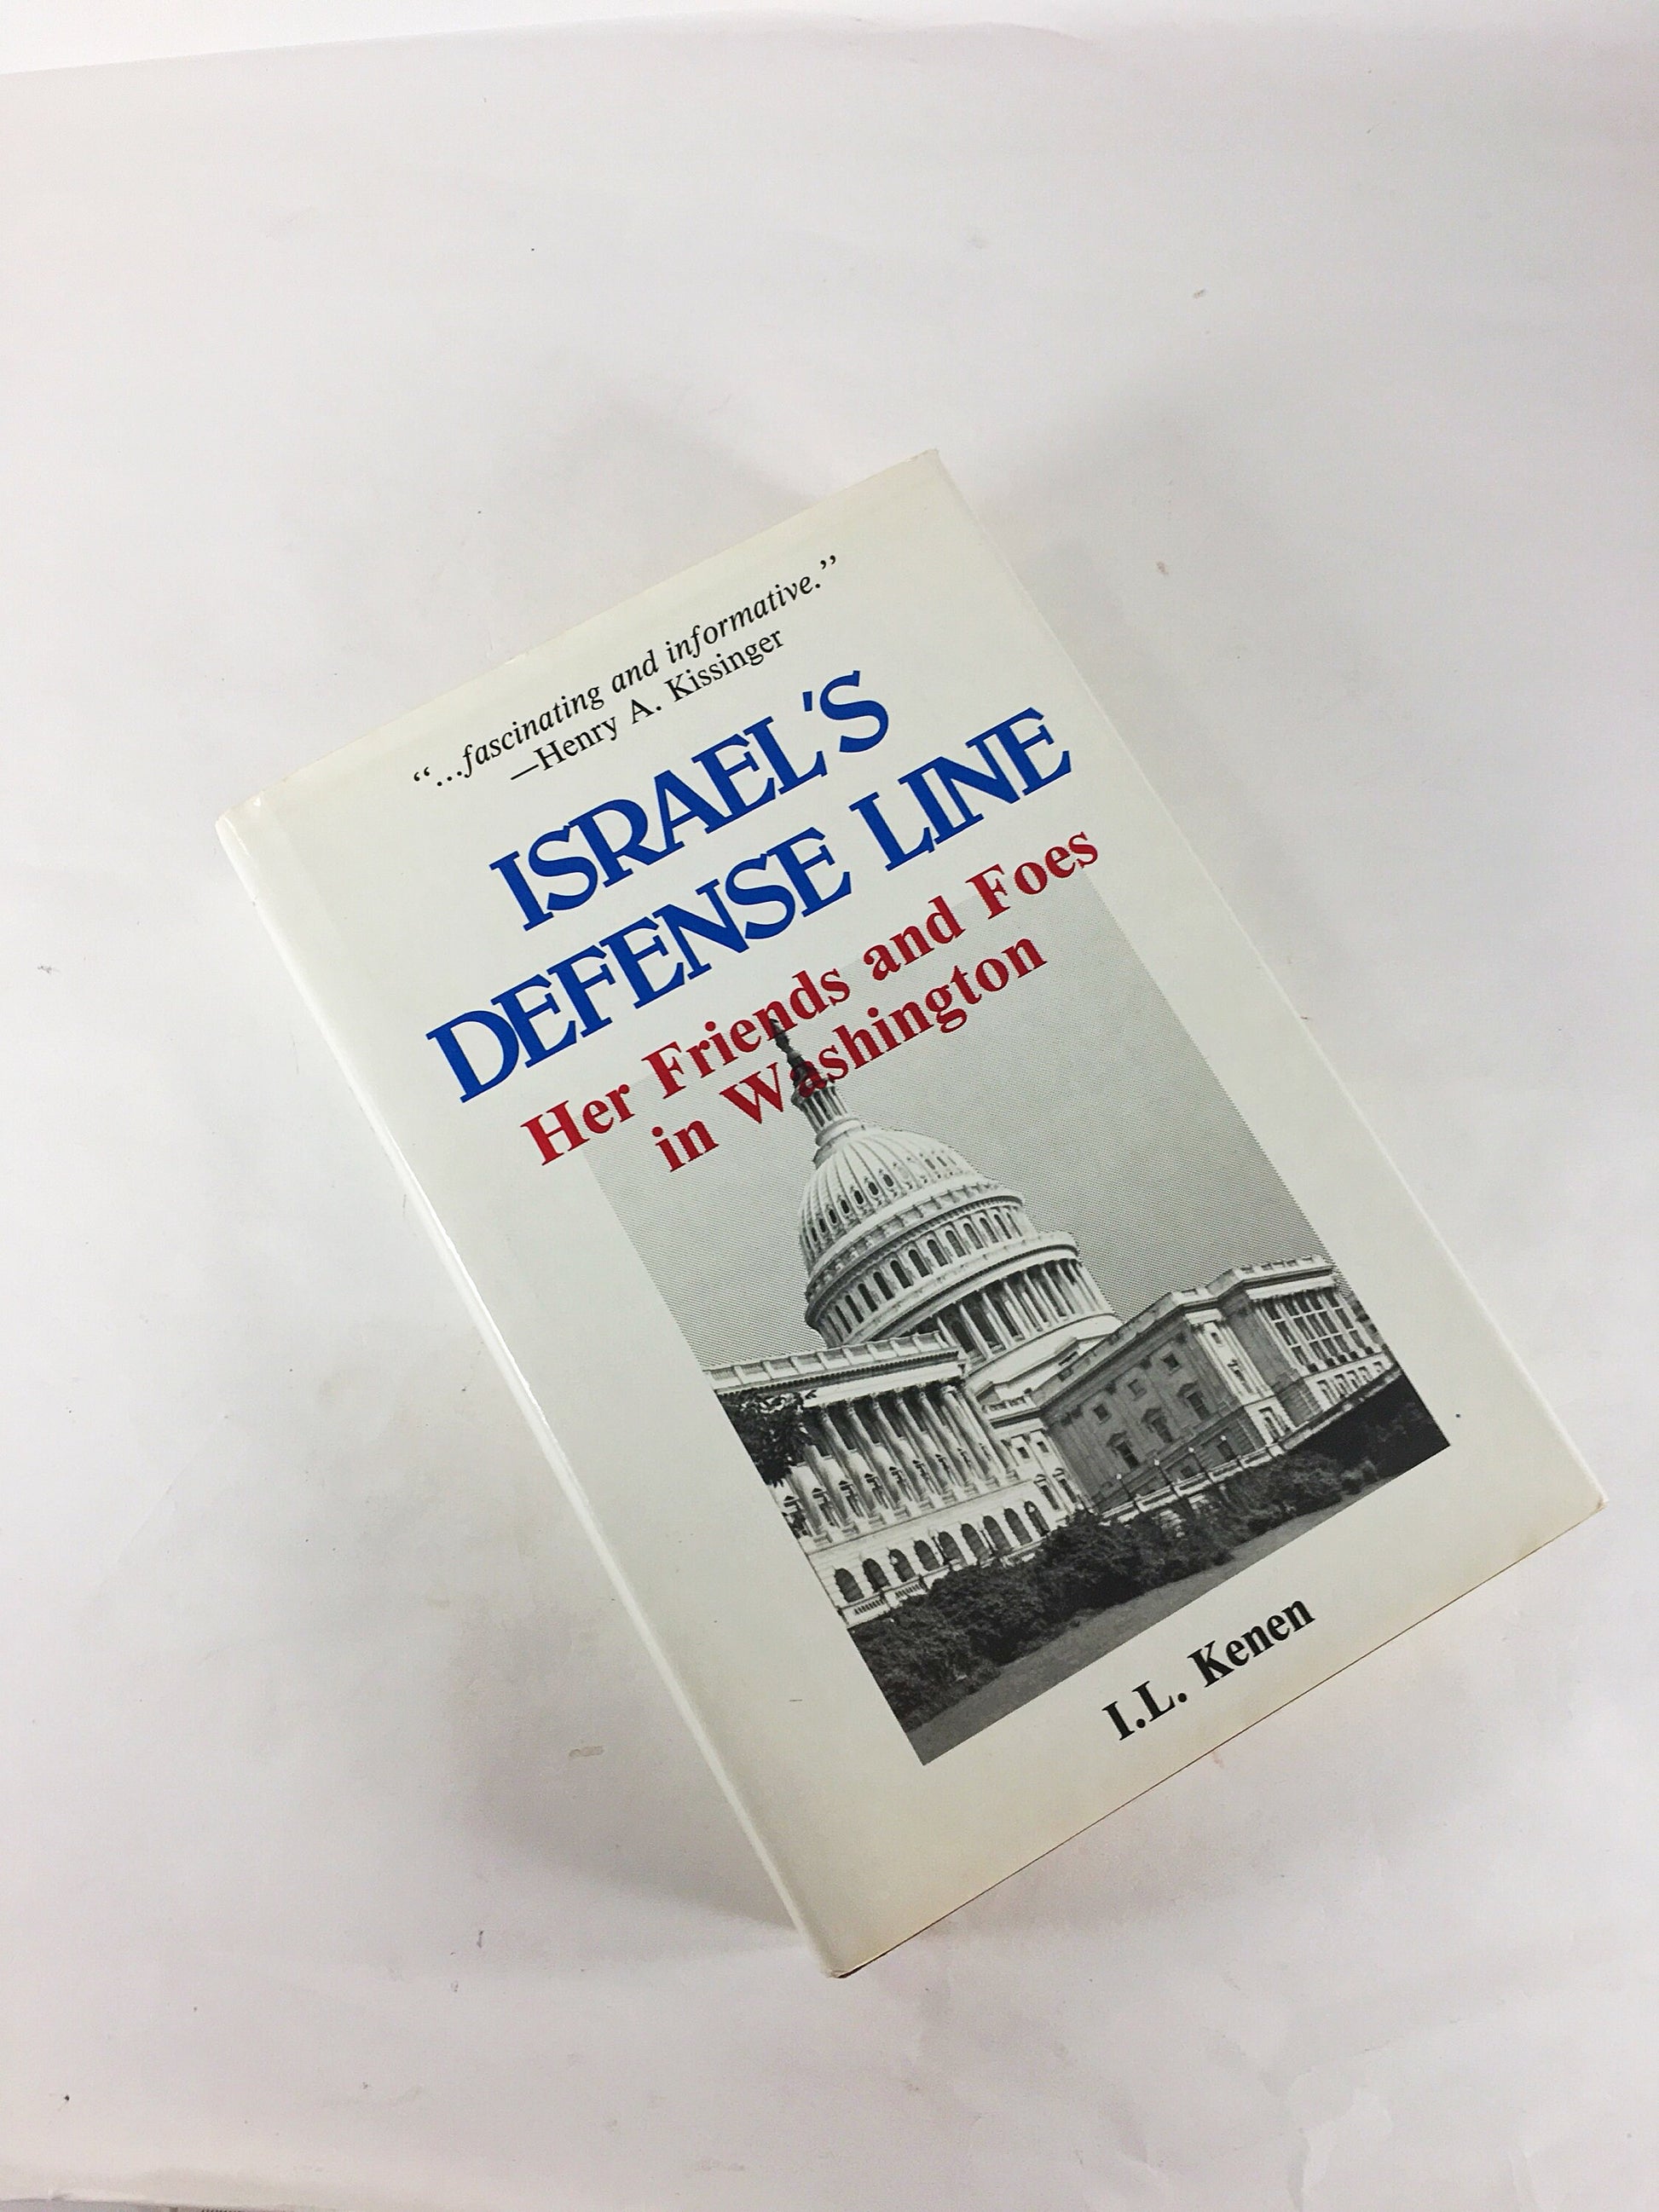 SIGNED Israel's Defense Line: Her Friends and Foes in Washington. Vintage First Edition book by IL Kenen circa 1981. International Politics